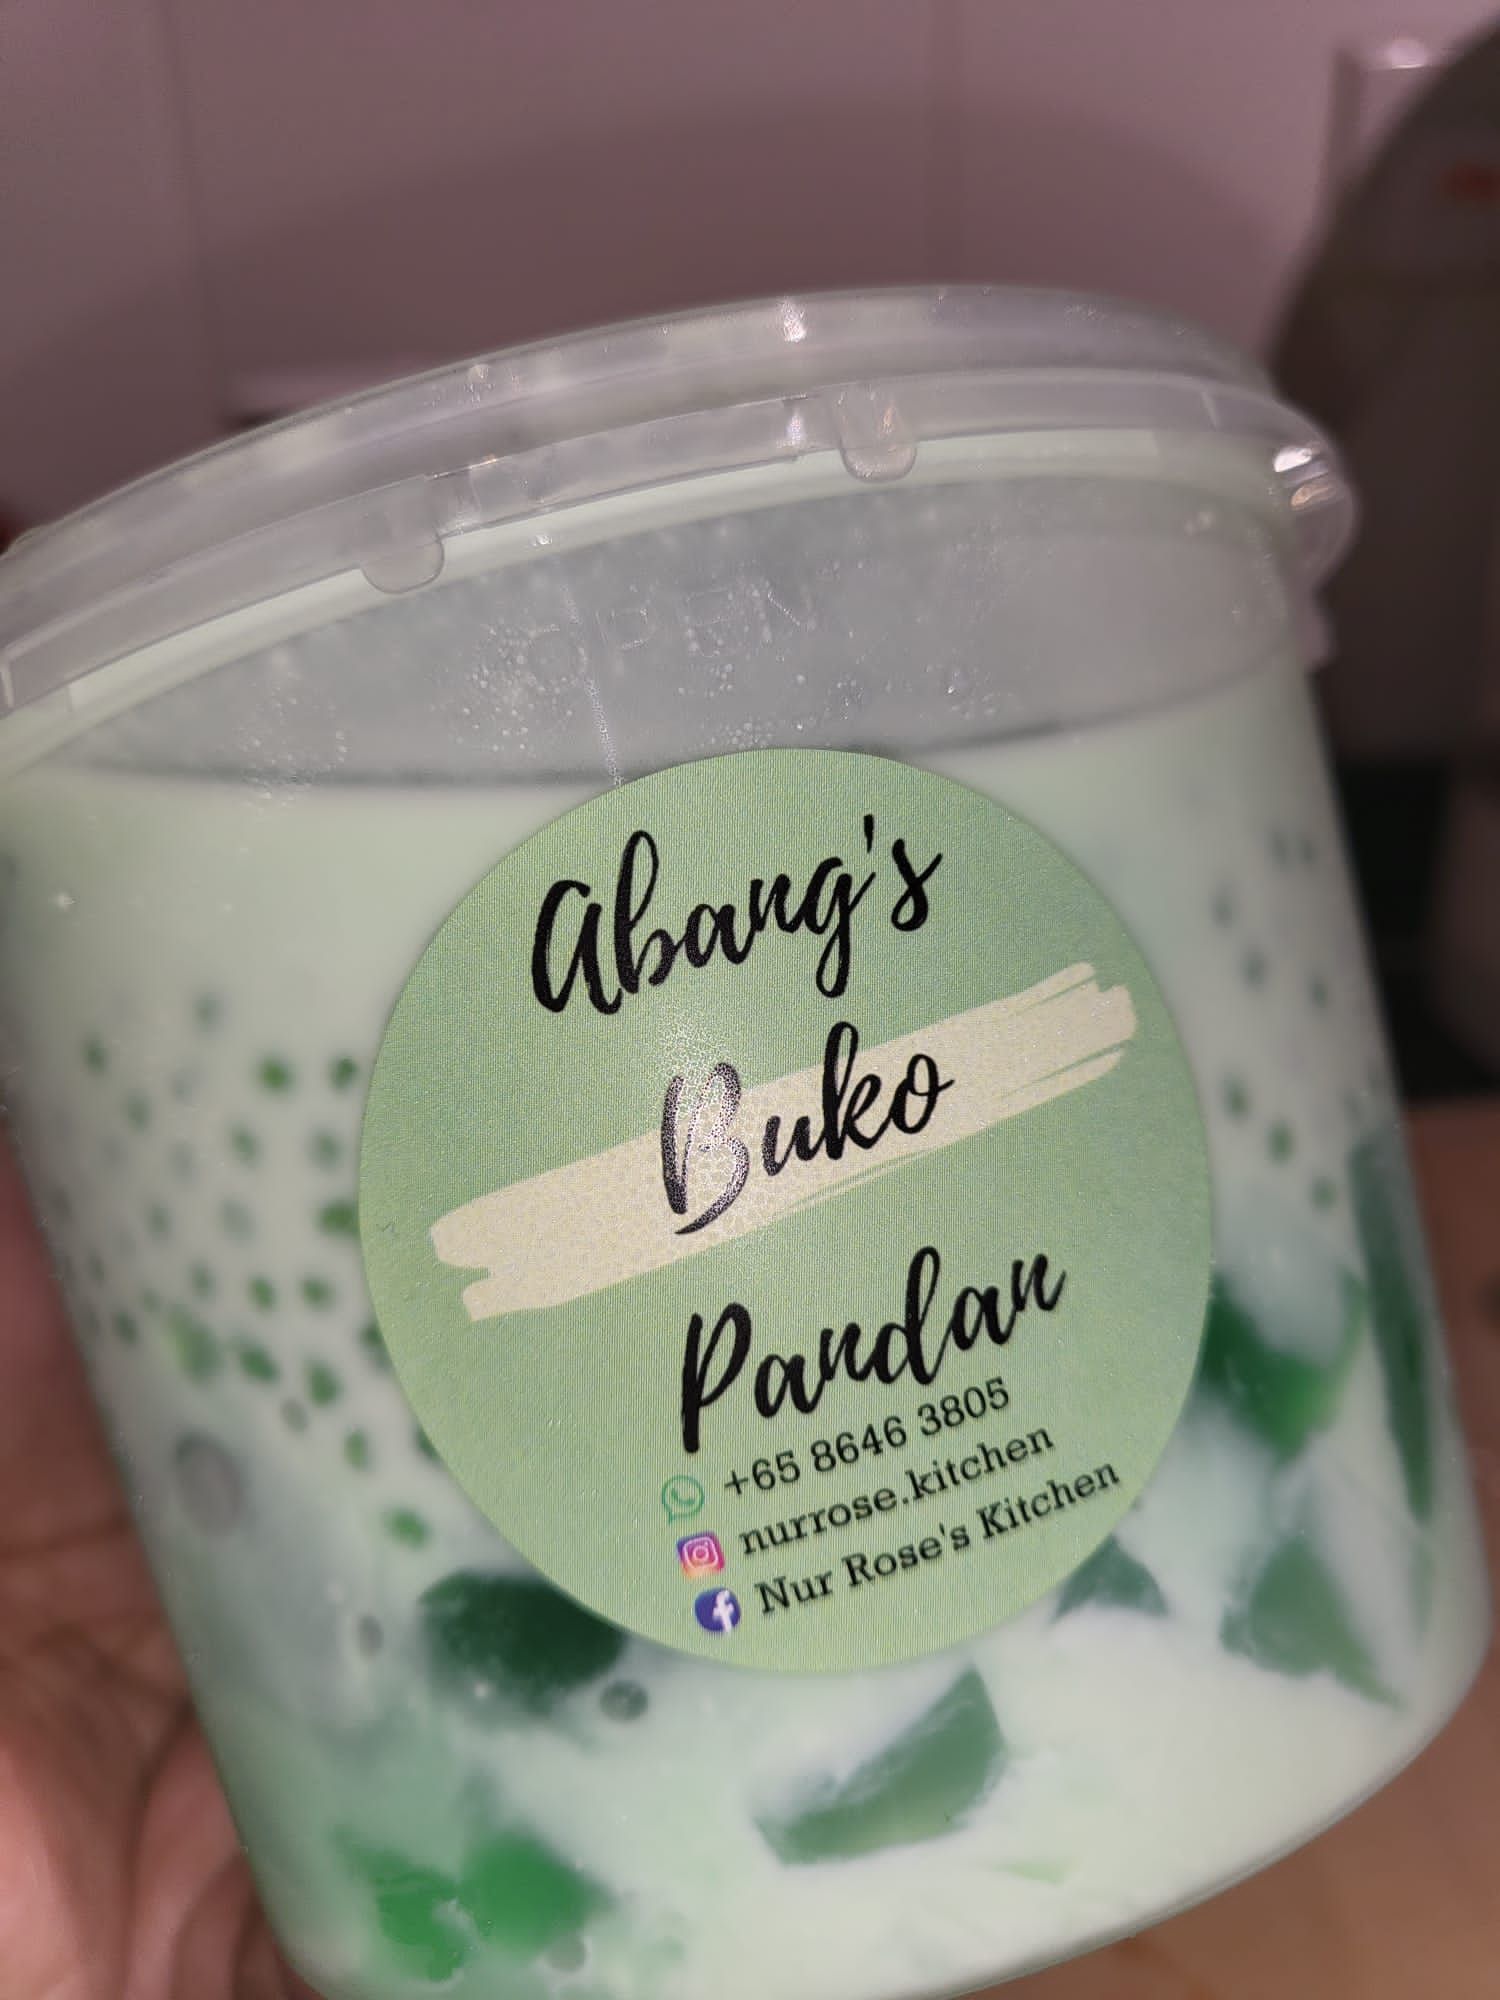 Abang's Buko Pandan in a bucket 👍Chef's Recommend 